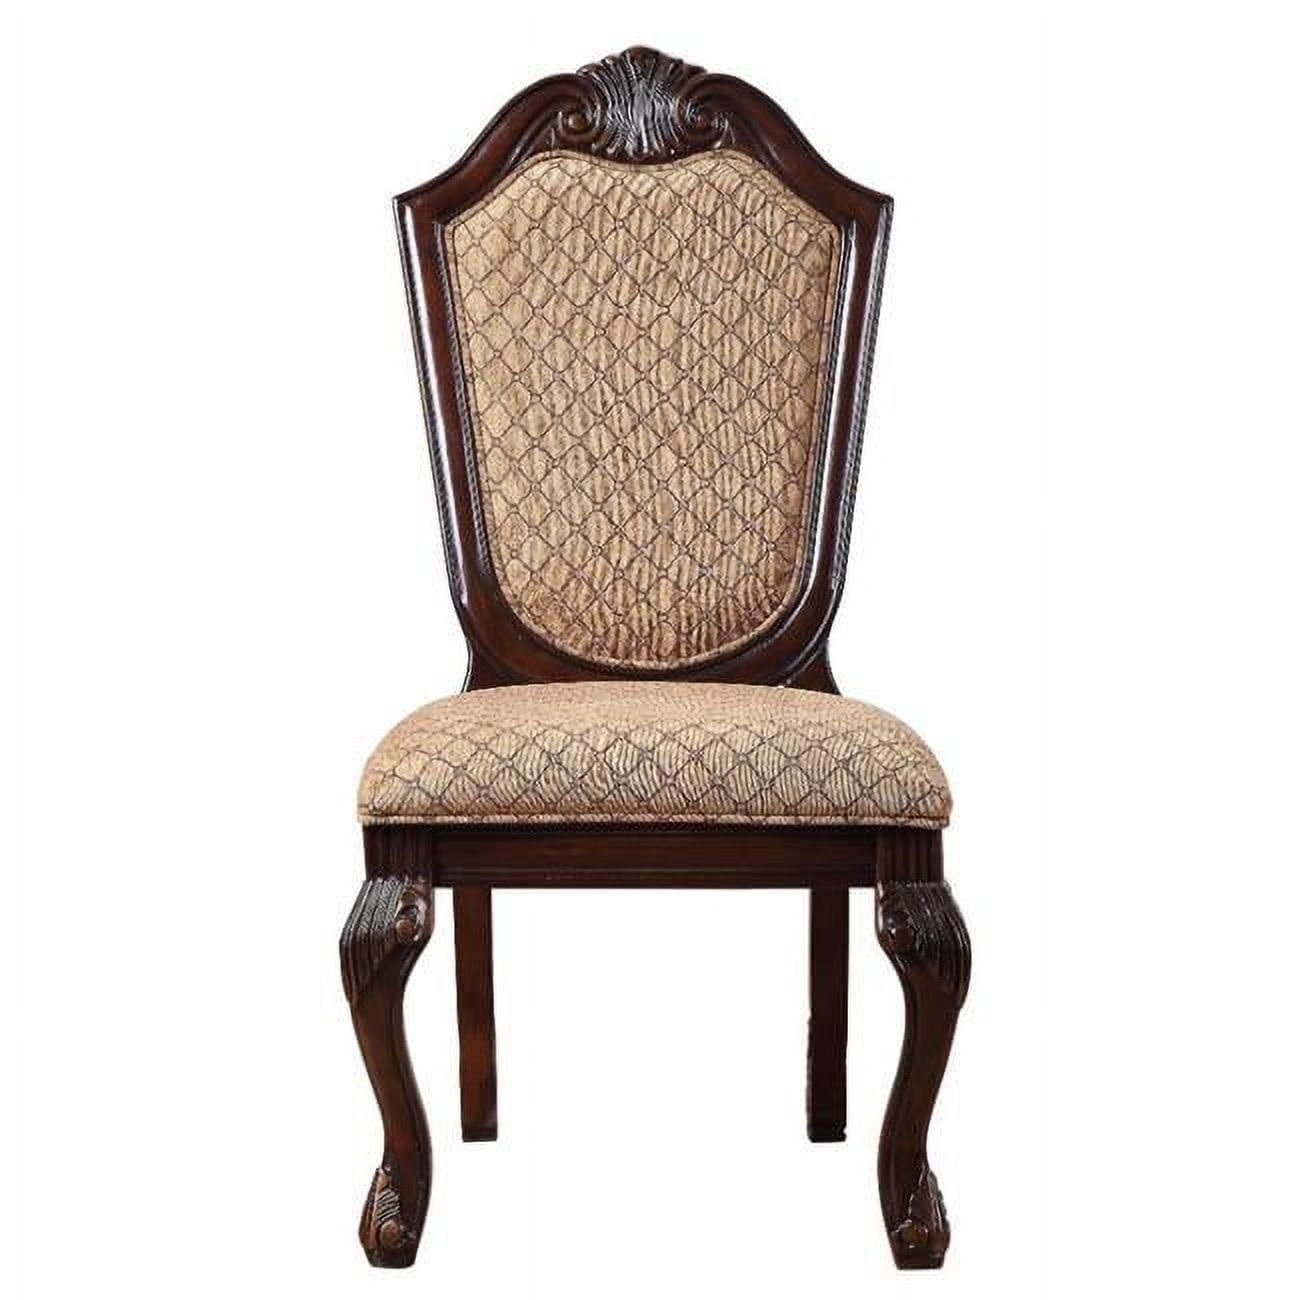 Picture of Acme Furniture 64077A 23 x 29 x 45 in. Chateau De Ville Side Chair, Espresso - Set of 2